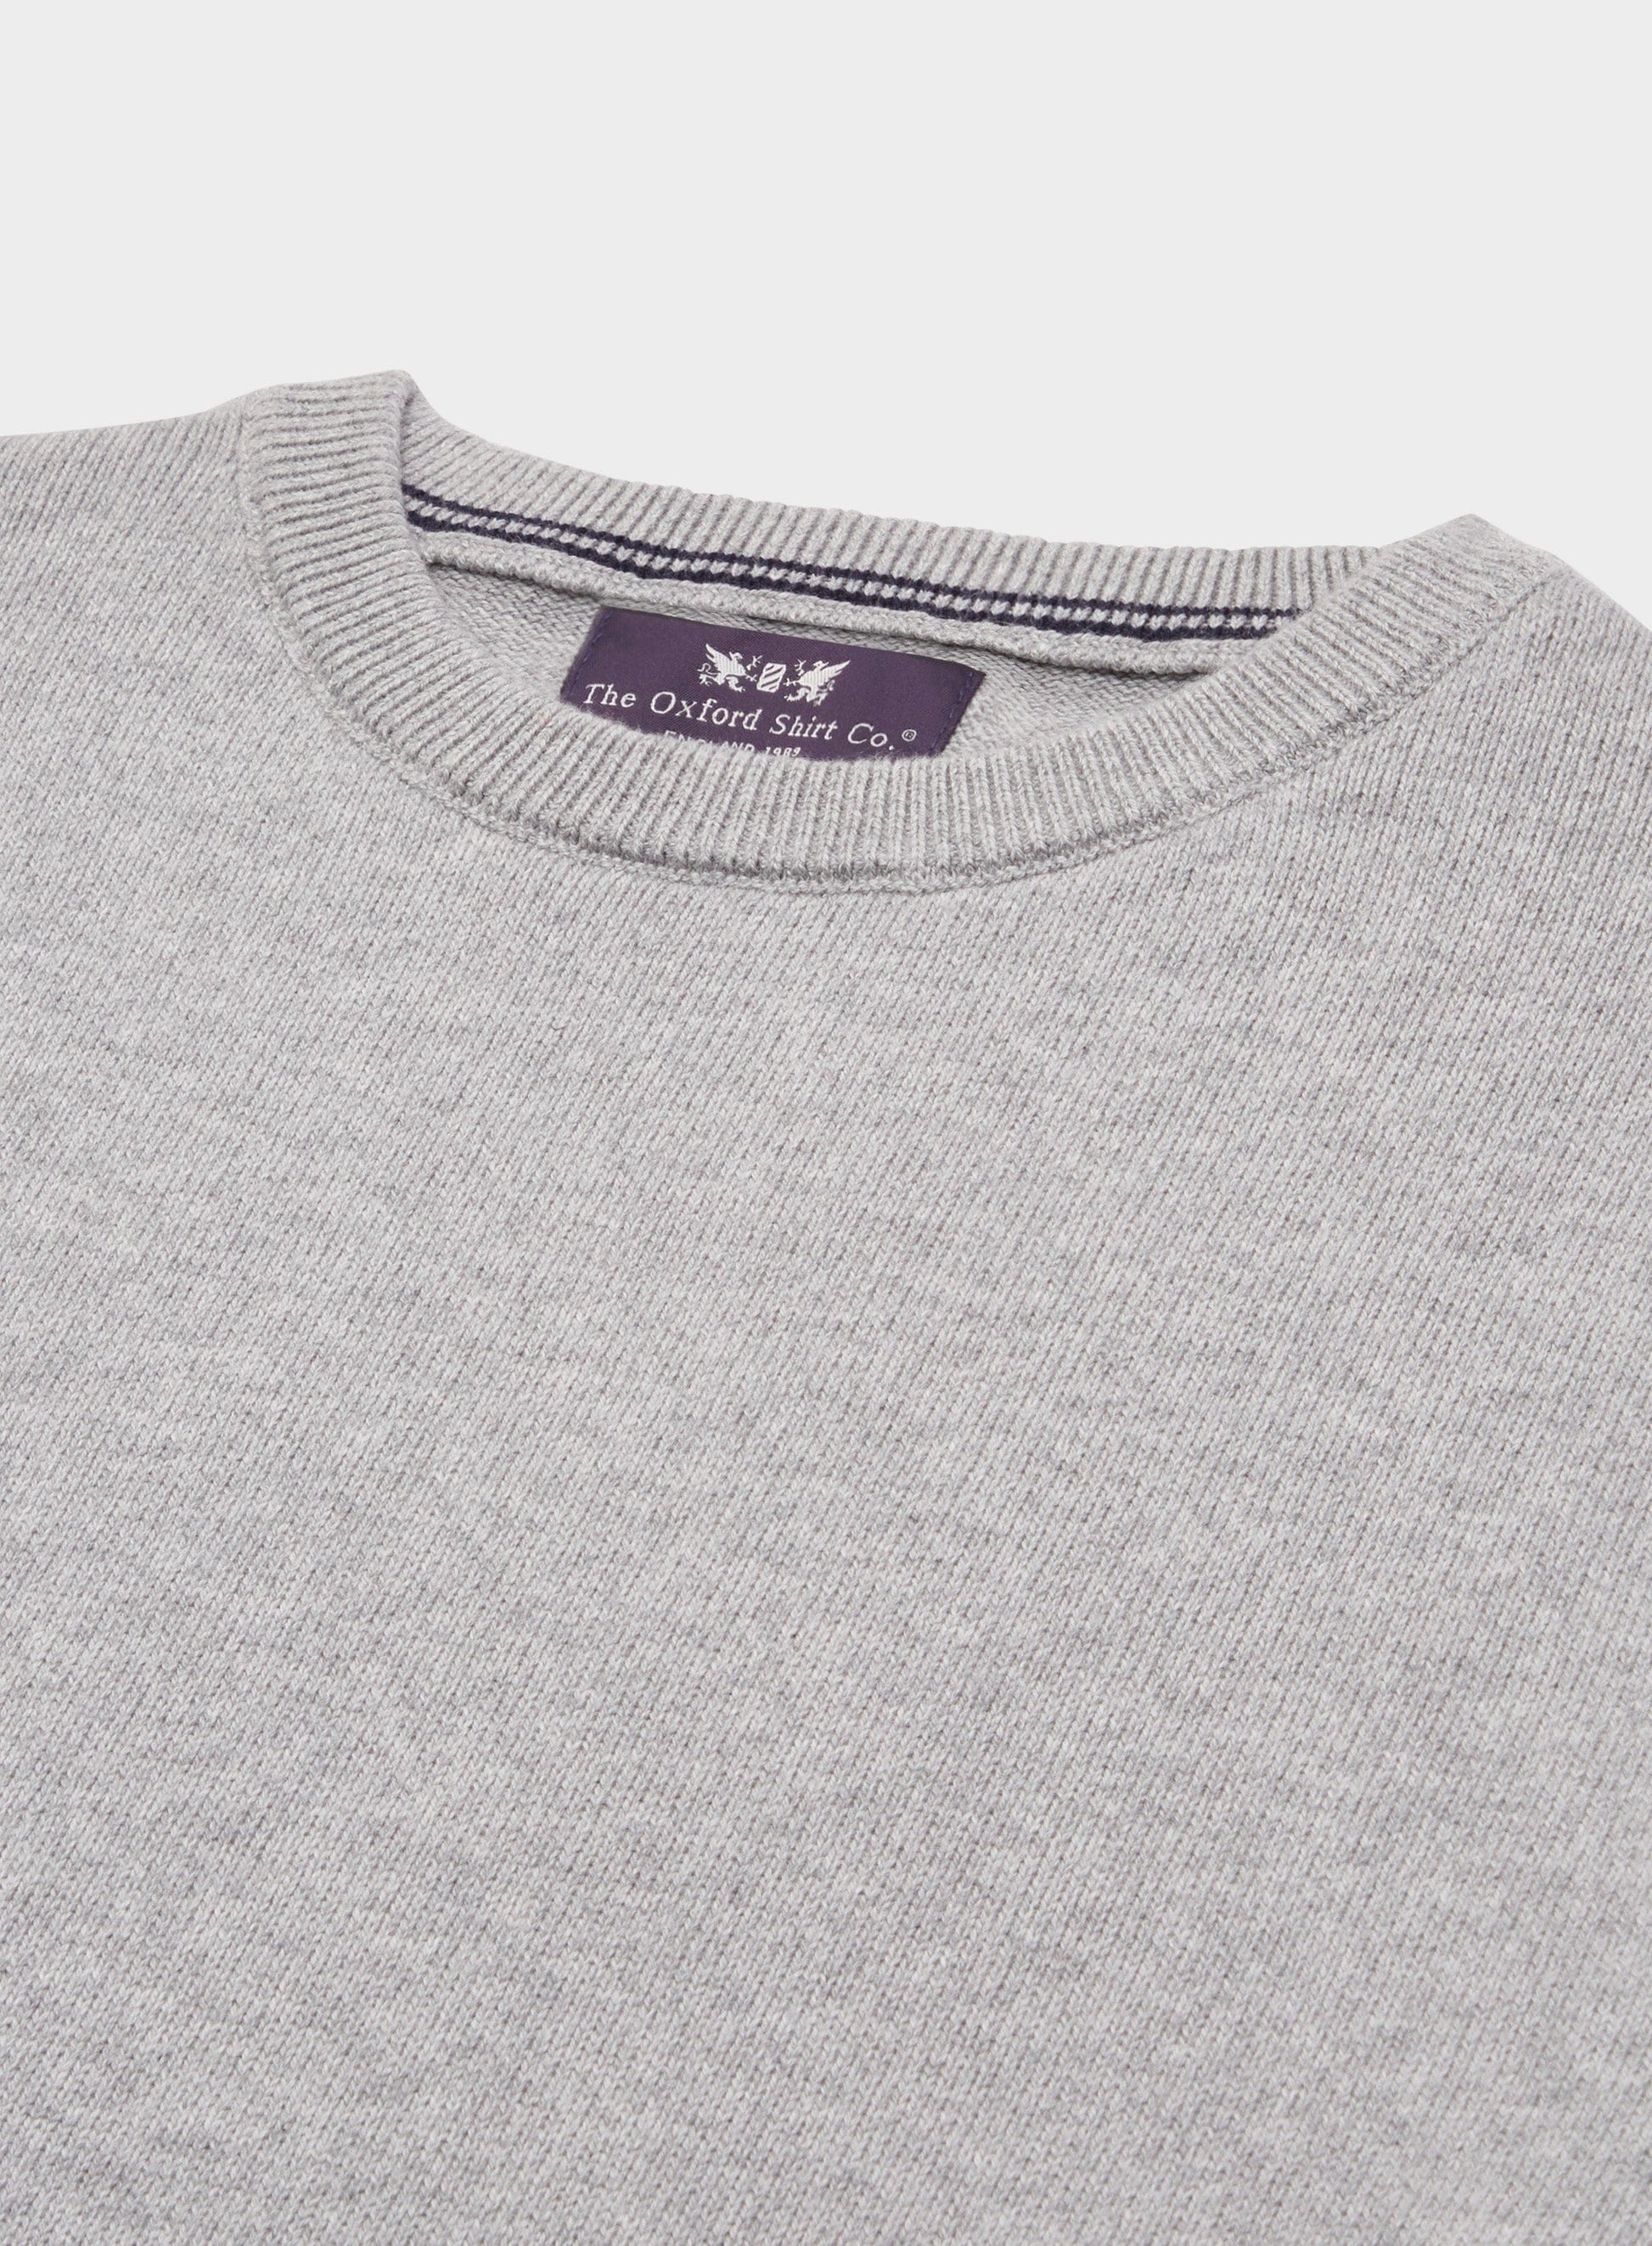 Mens Cotton Cashmere 1/4 Zip Jumper in Grey - Oxford Shirt Co.